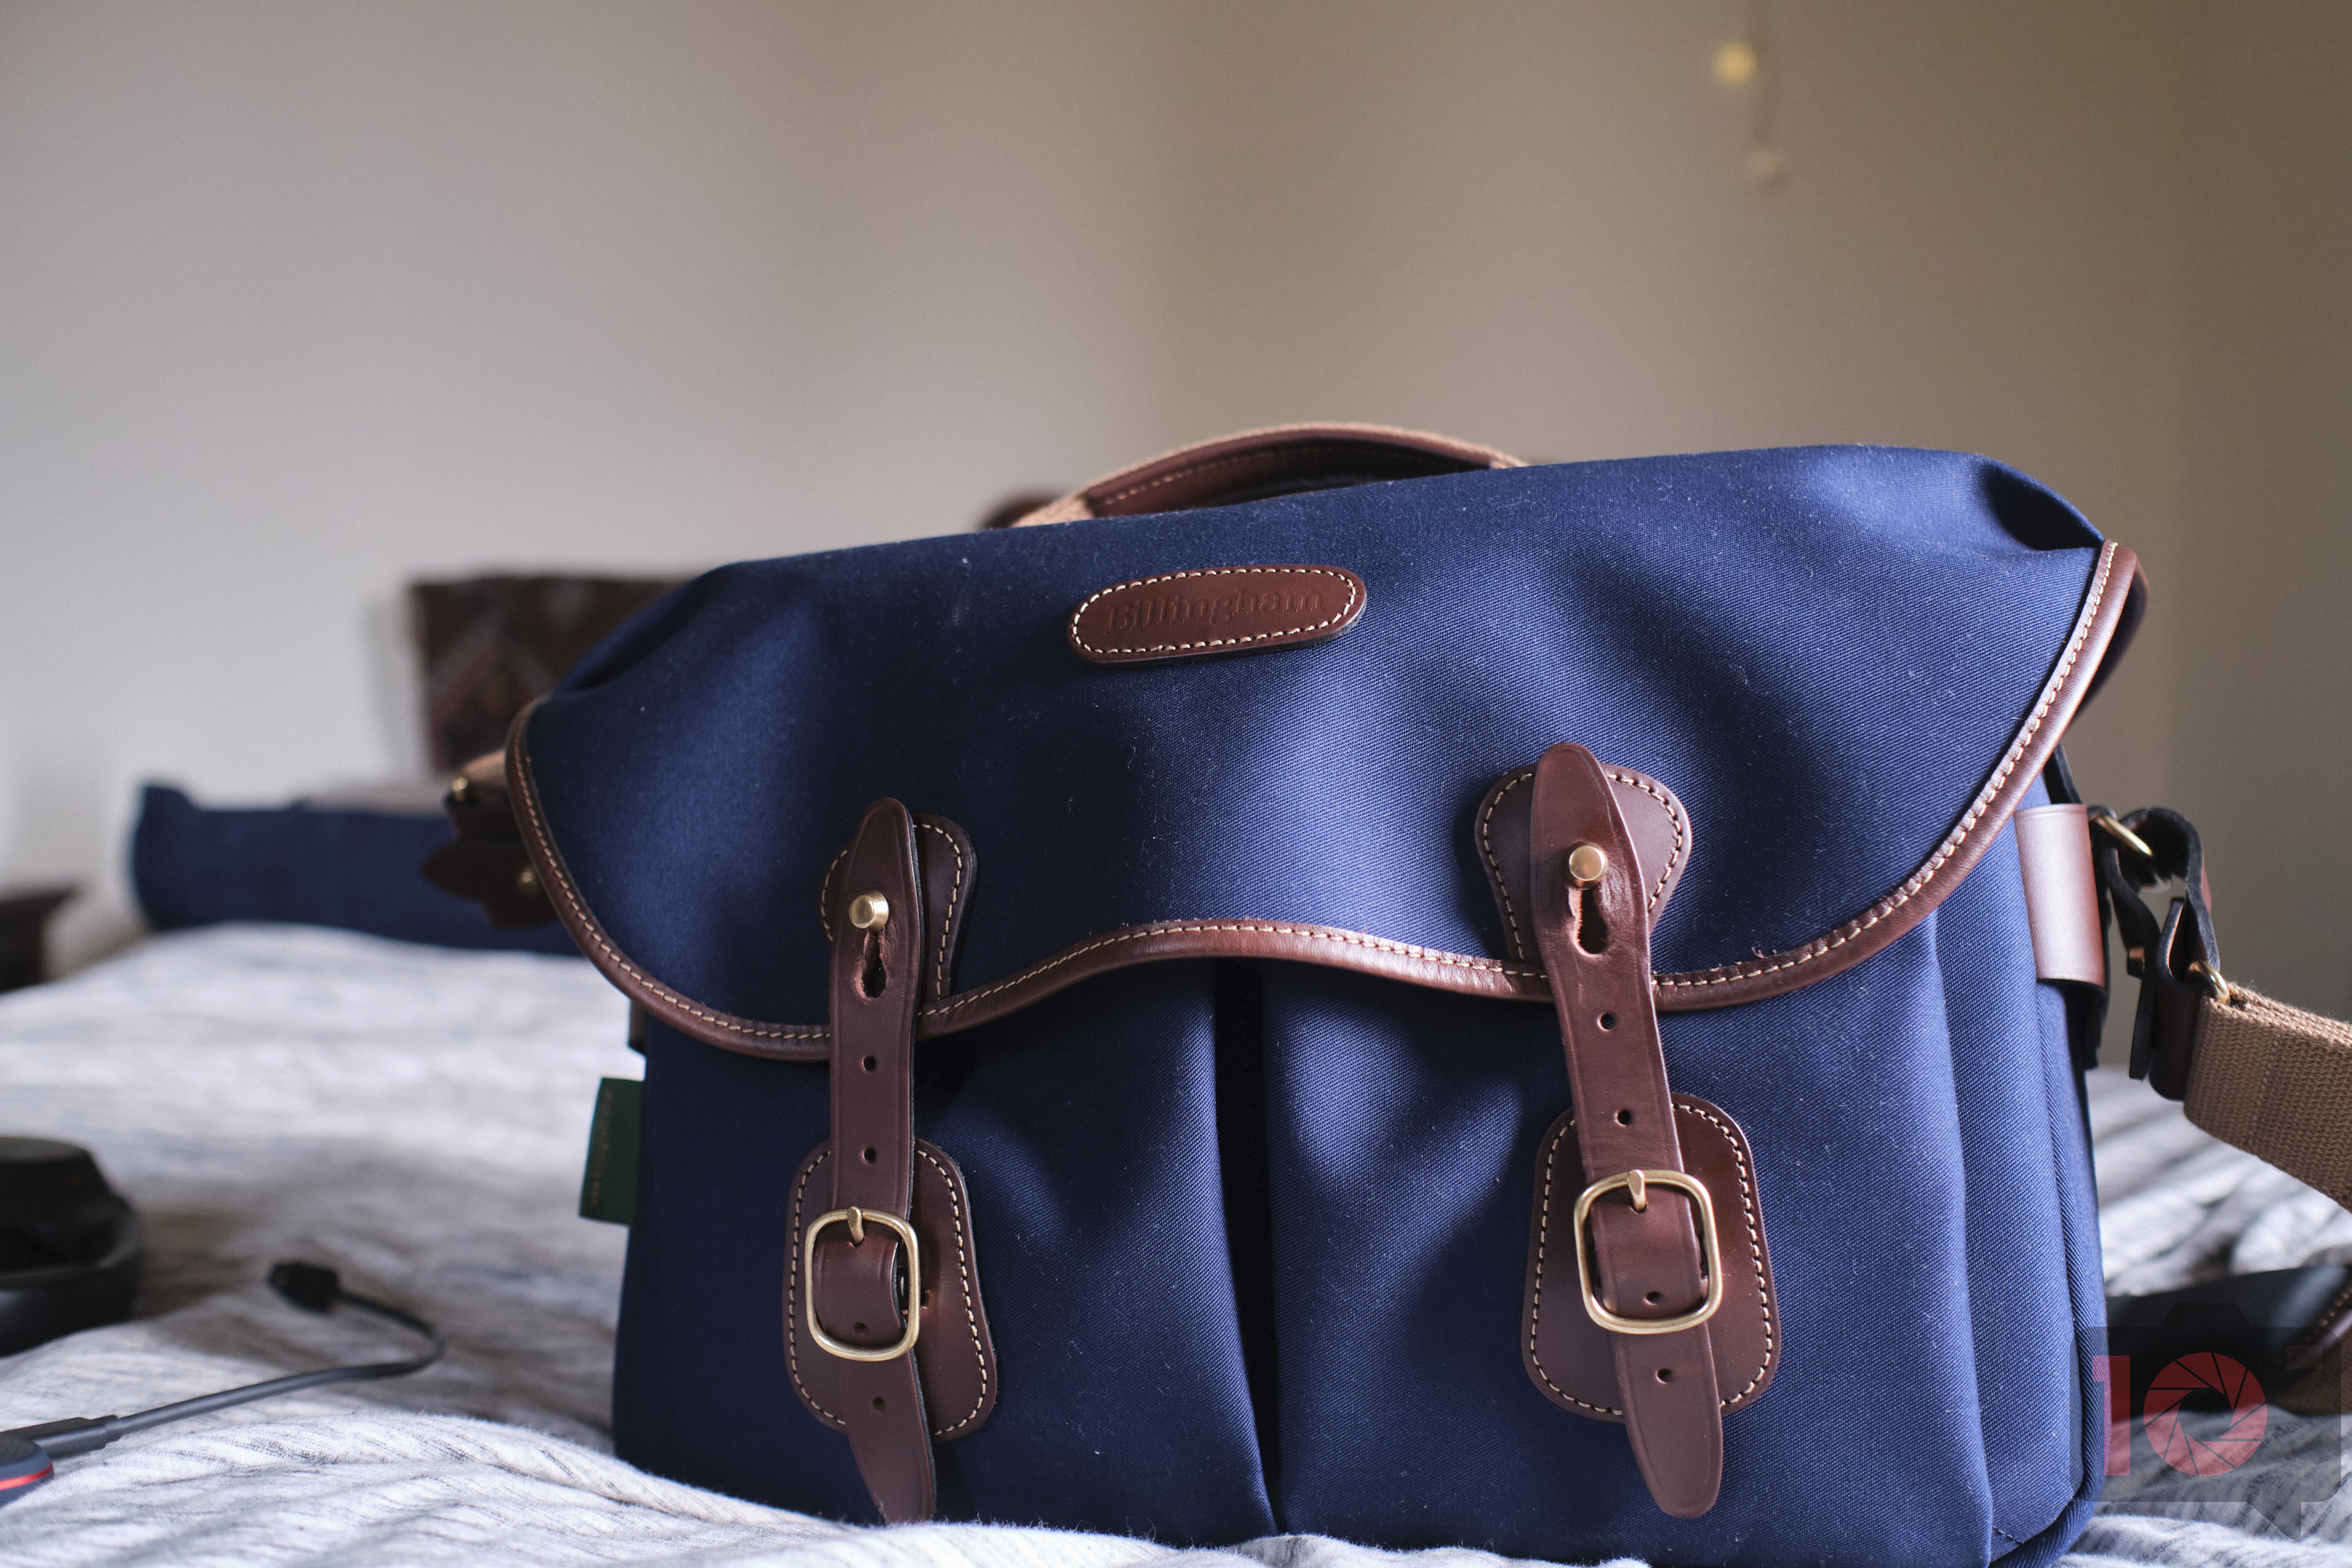 Chris Gampat The Phoblographer Hadley One in Navy and Brown review product images 2.81-125s1600